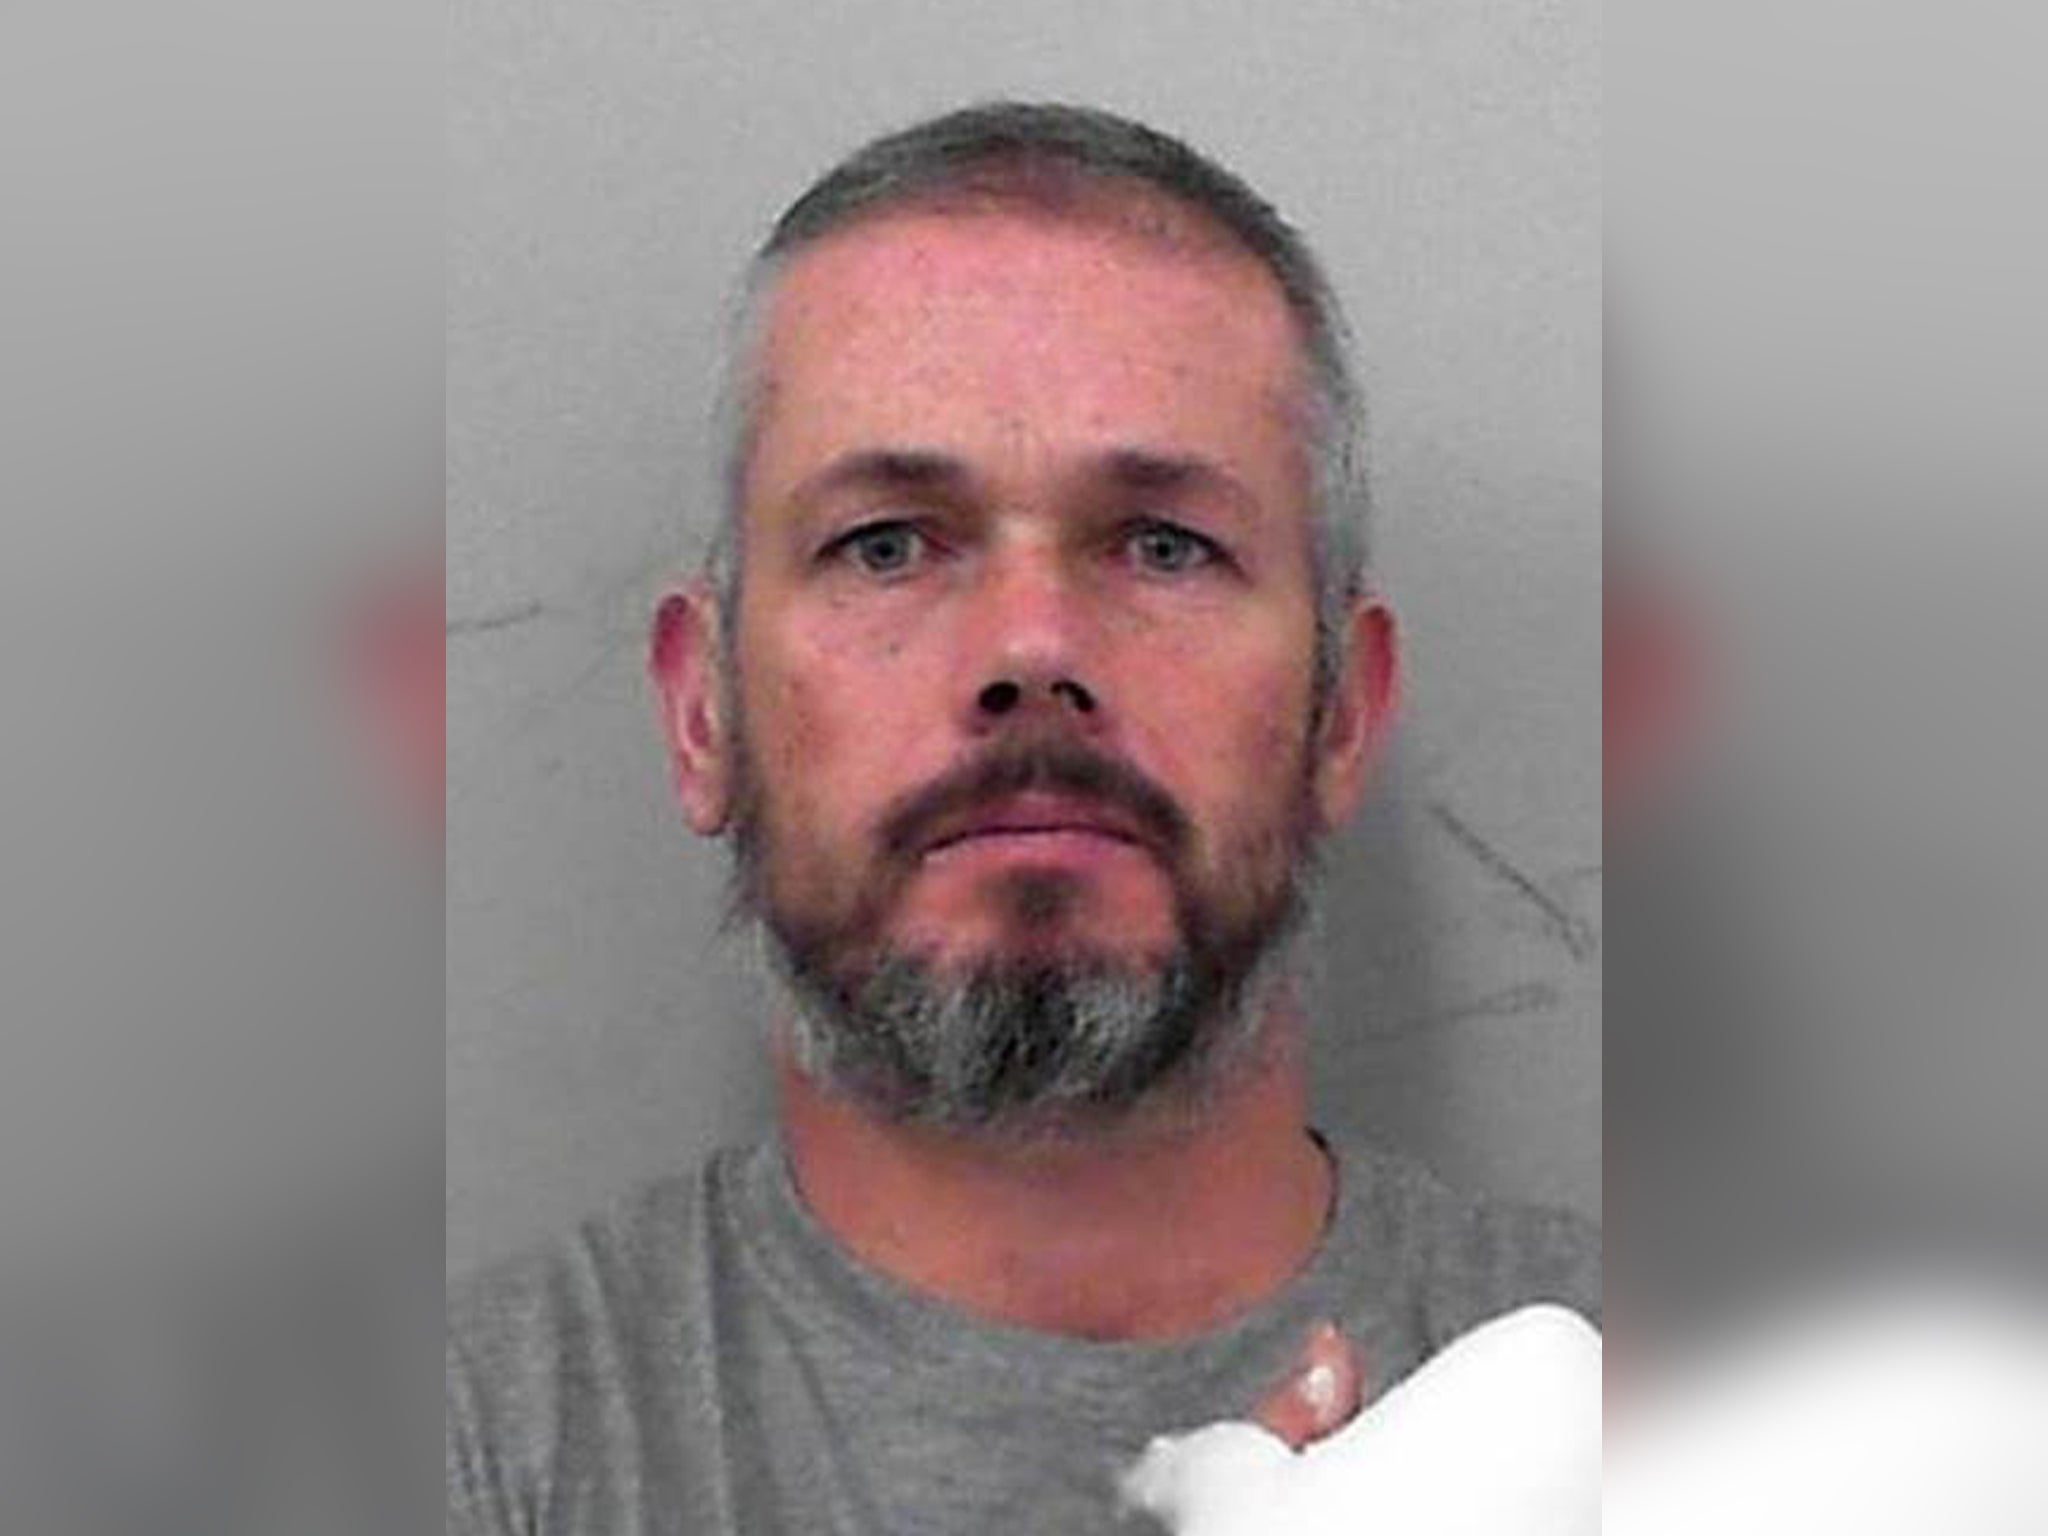 Andrew Tavener has been jailed for life after admitting murder